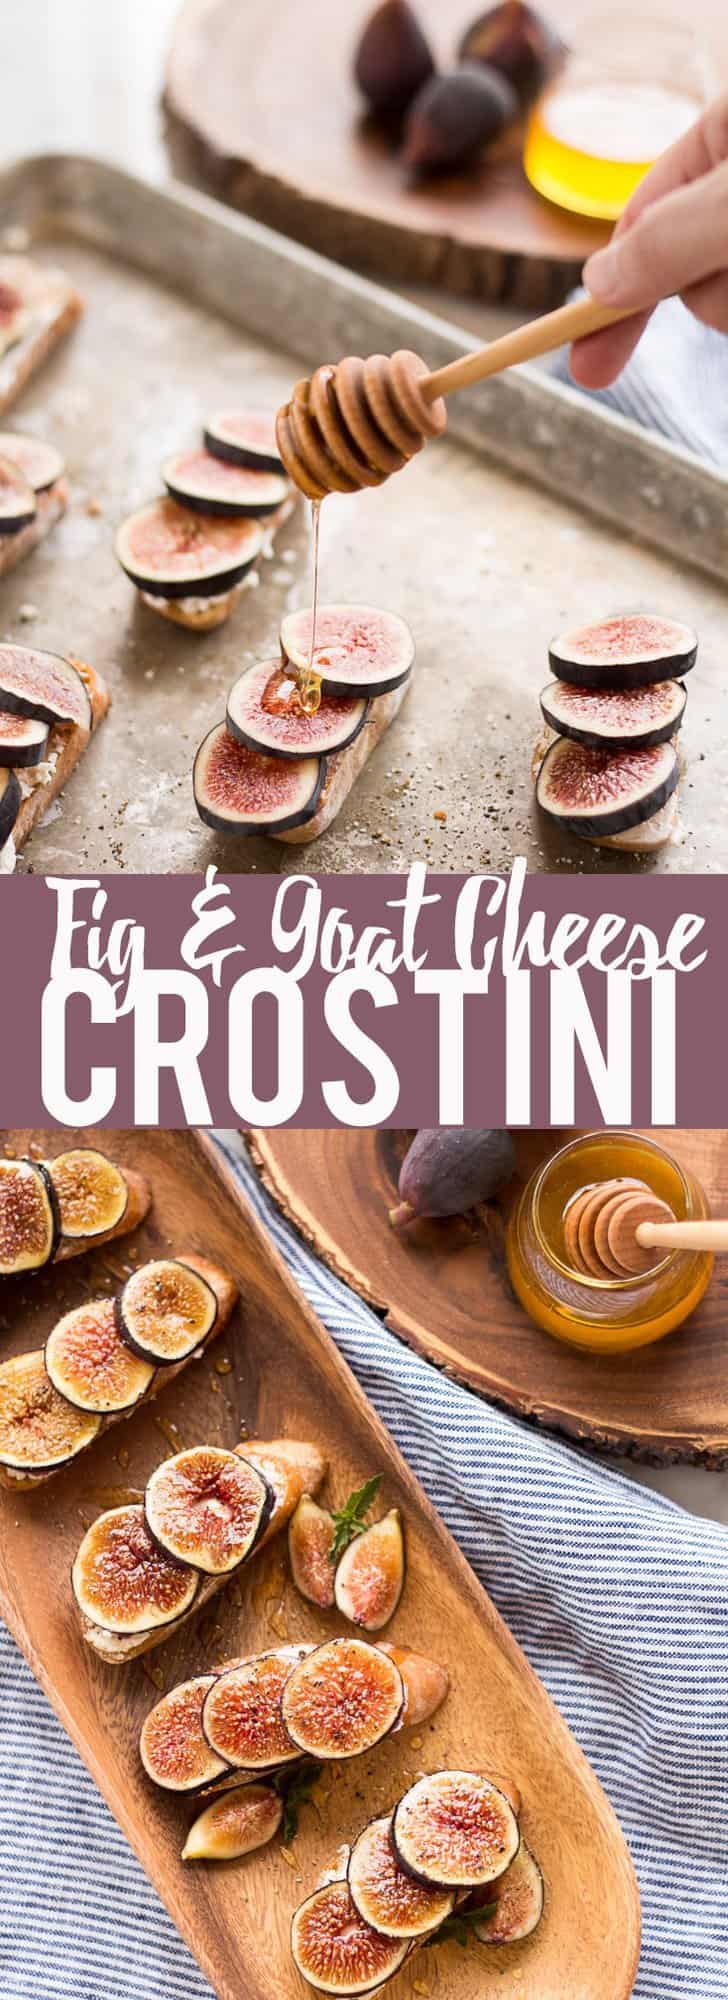 These Fig and Goat Cheese Crostini with Honey are one of my favorite simple summer appetizers. Using fresh figs, goat cheese, honey and pepper, these are an easy but elegant starter or snack.